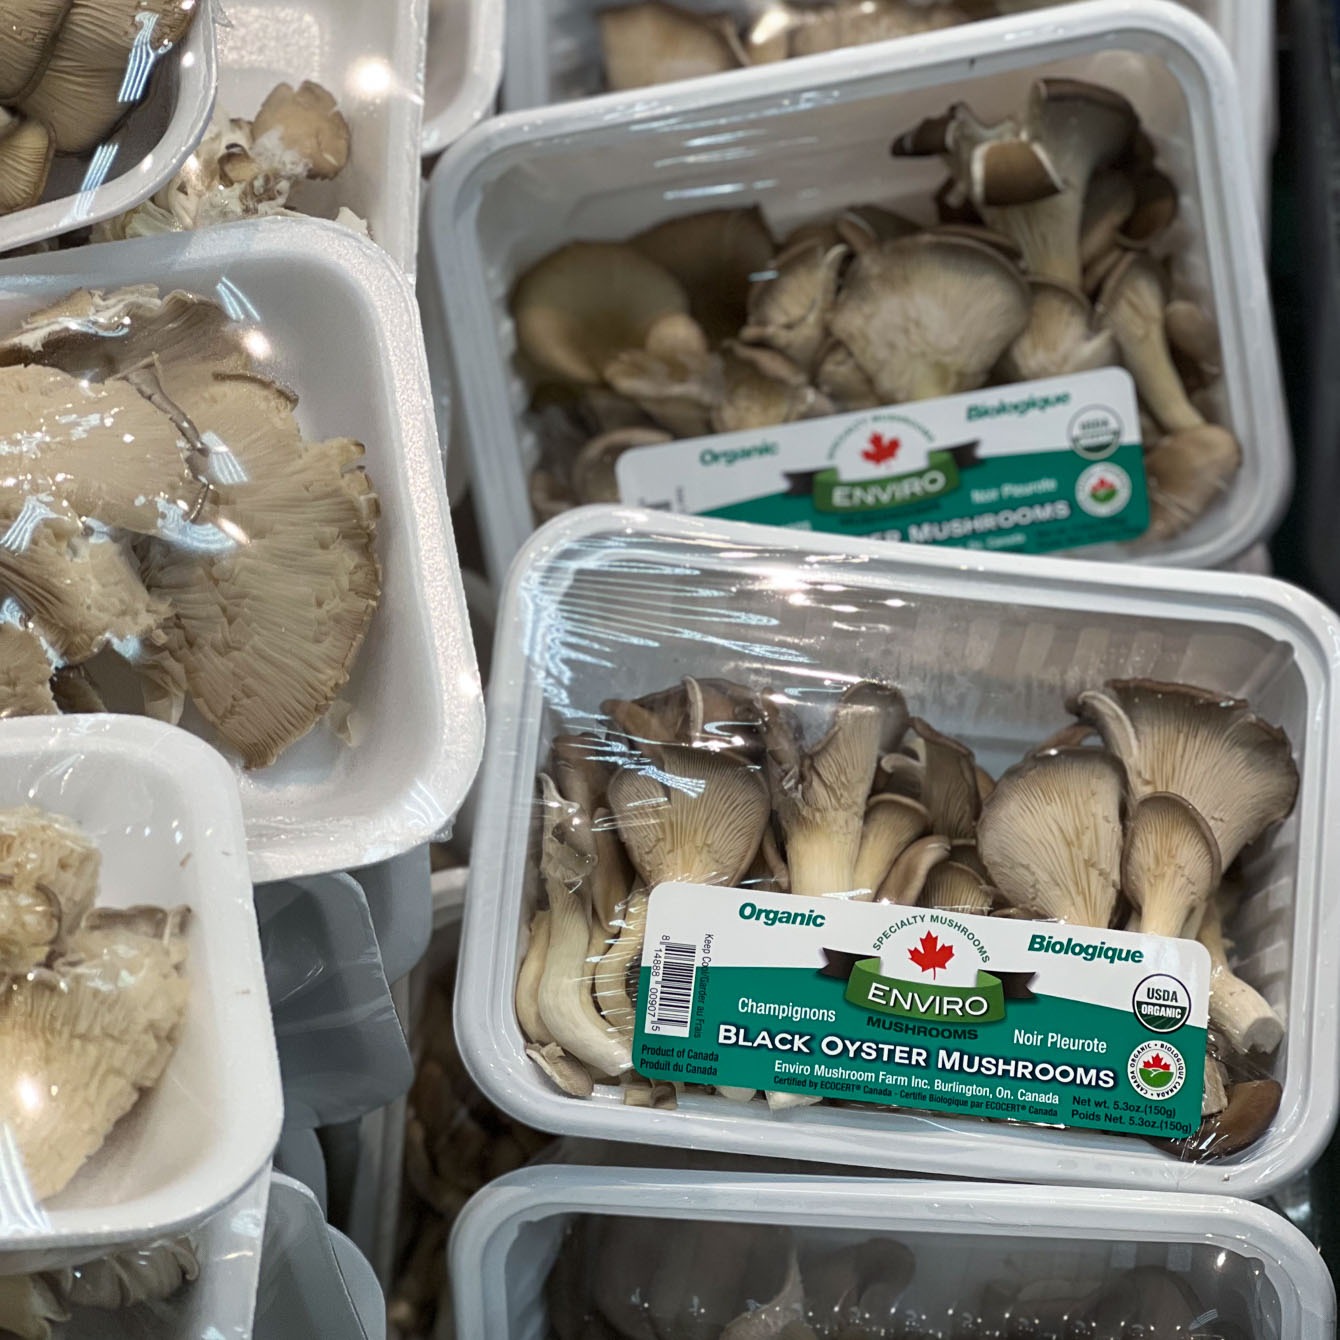 Bundles of oyster mushroom are shown in the package